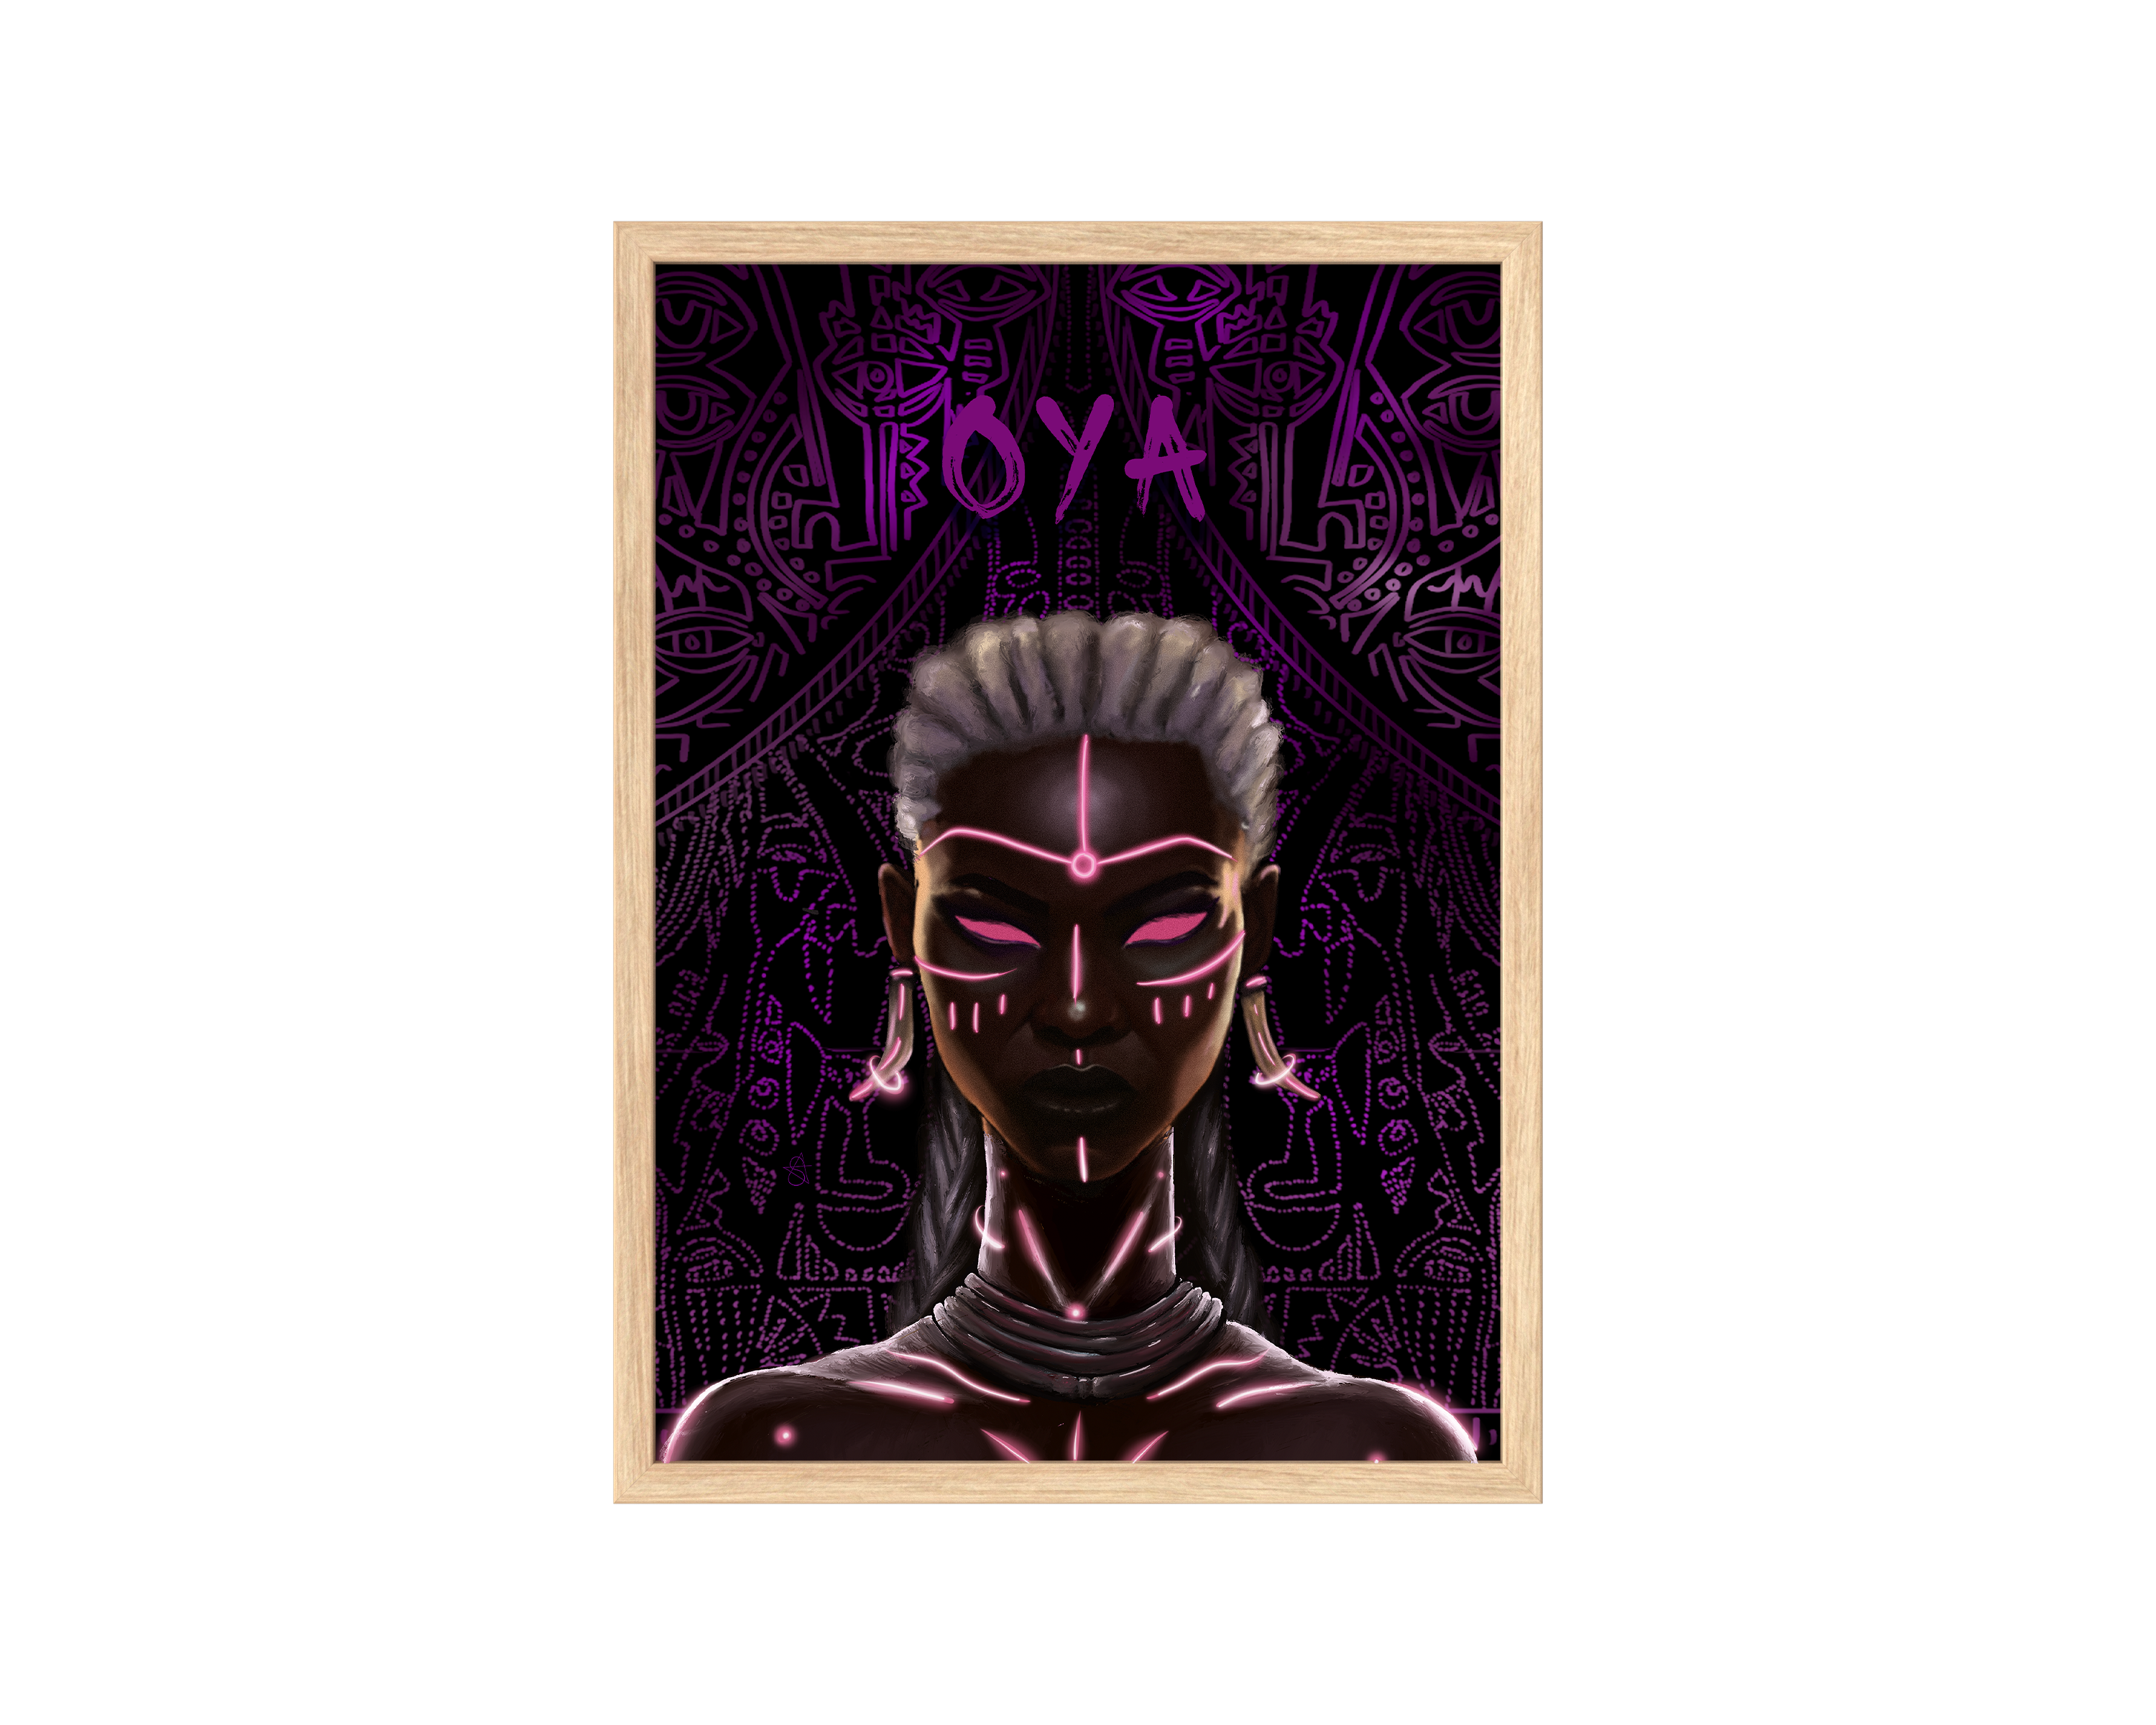 Oya Holographic Art Print on high-quality matte or velvet paper, framed in gallery black, white, or natural maple, depicting Yoruba Orisa of storms and wind.